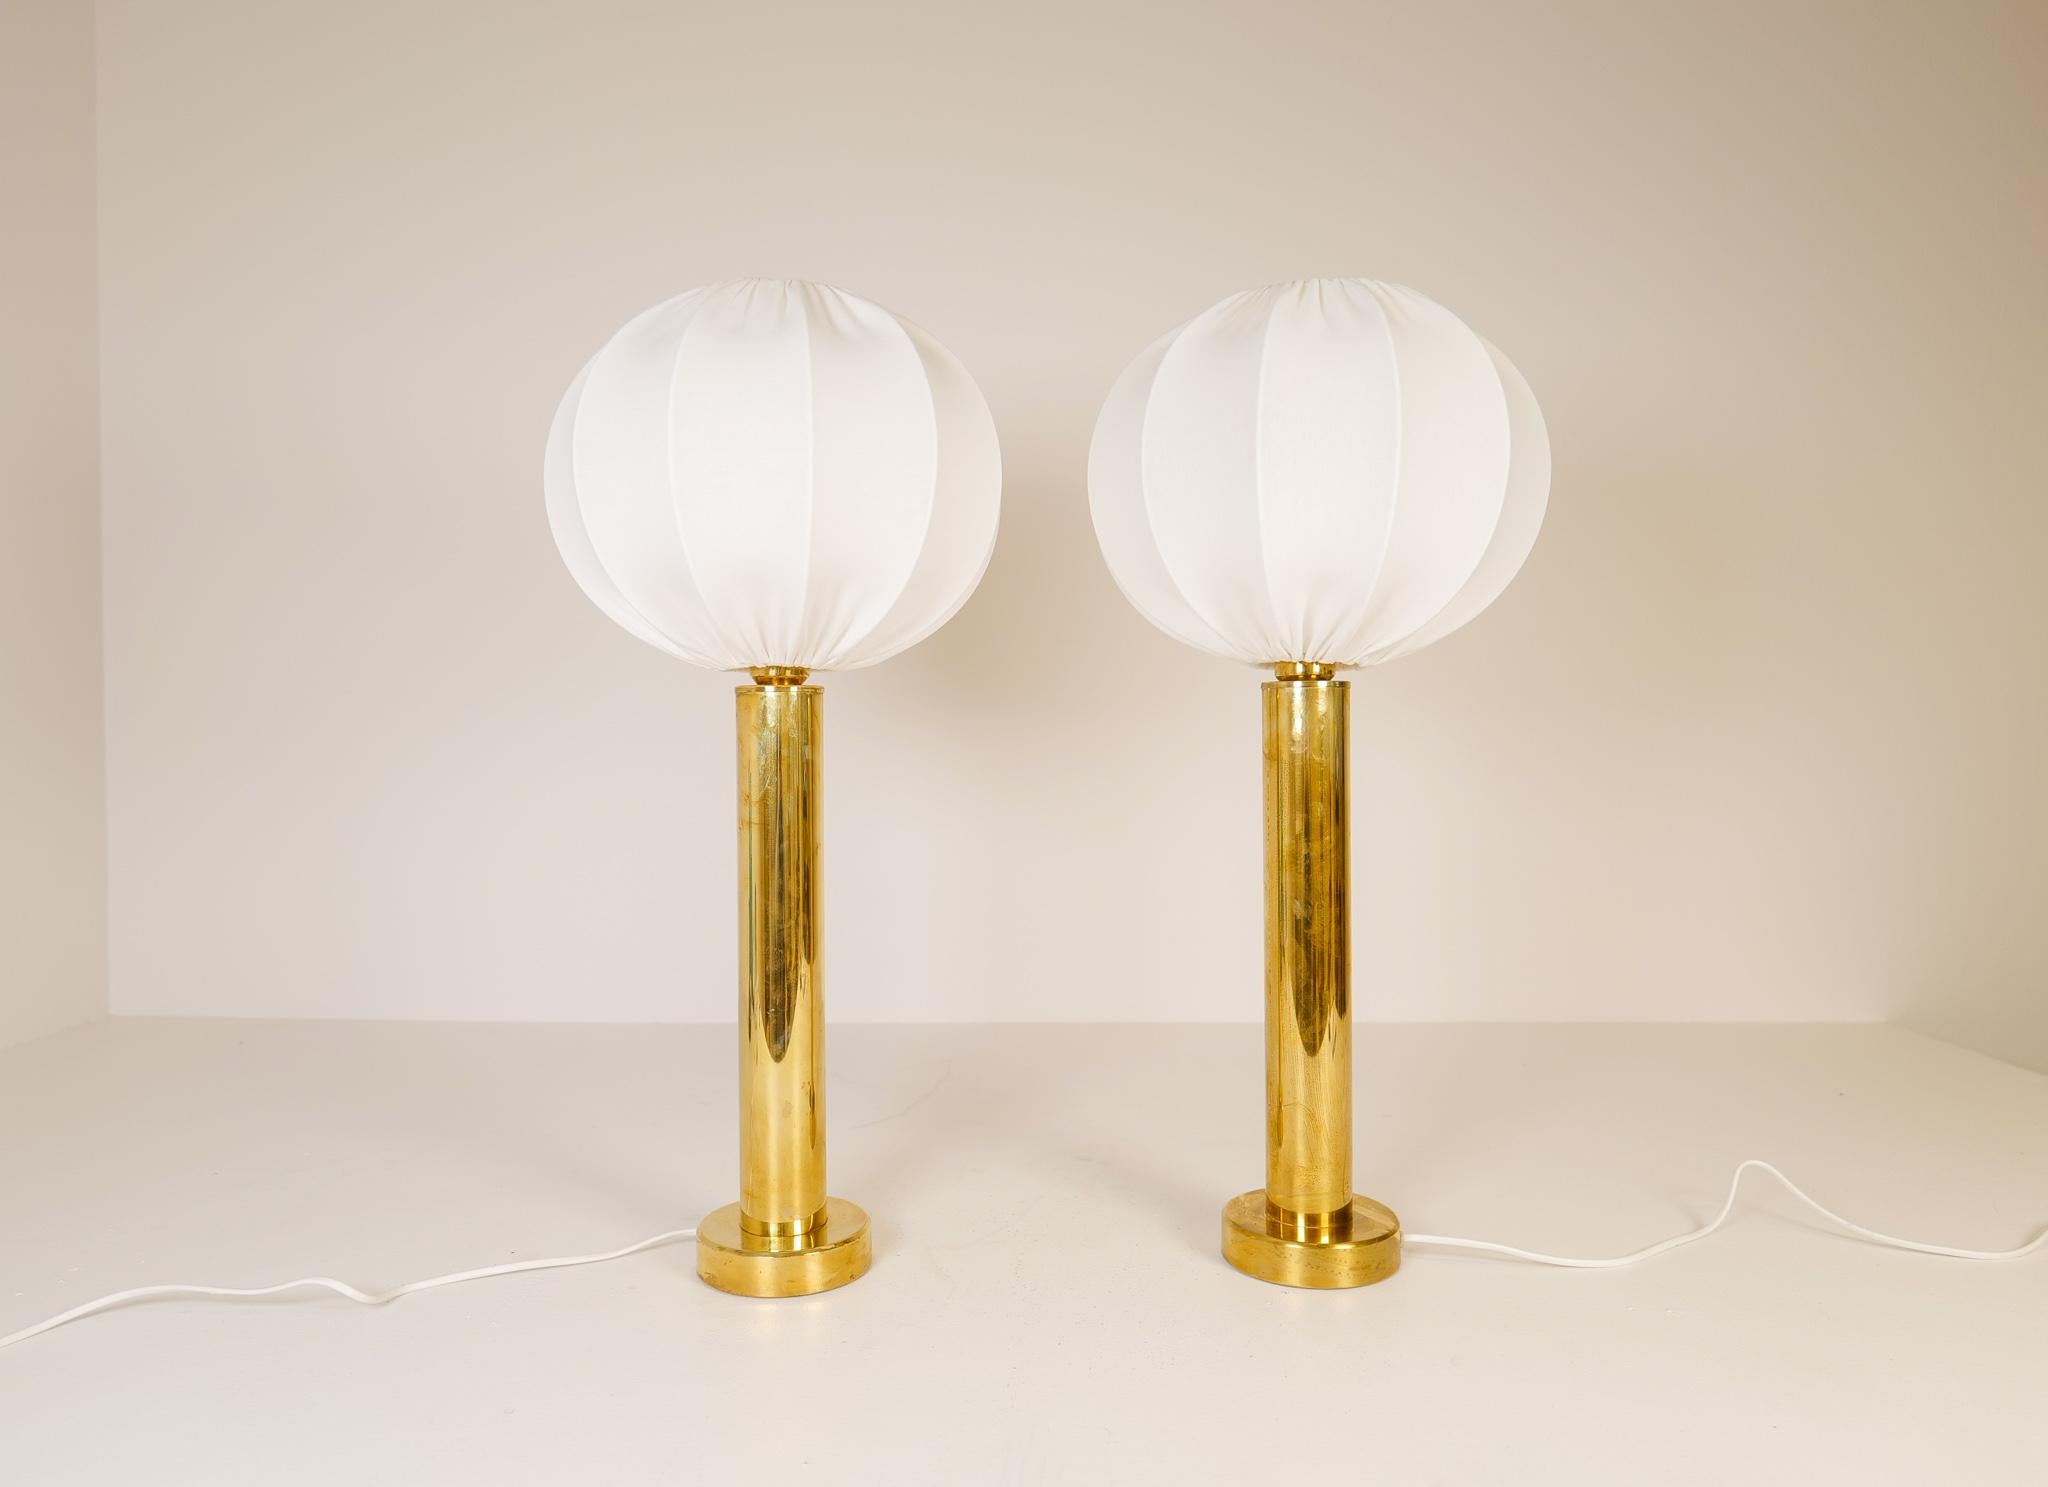 Swedish Midcentury Pair of Brass Table Lamps by Kosta Elarmatur, Sweden, 1960s For Sale